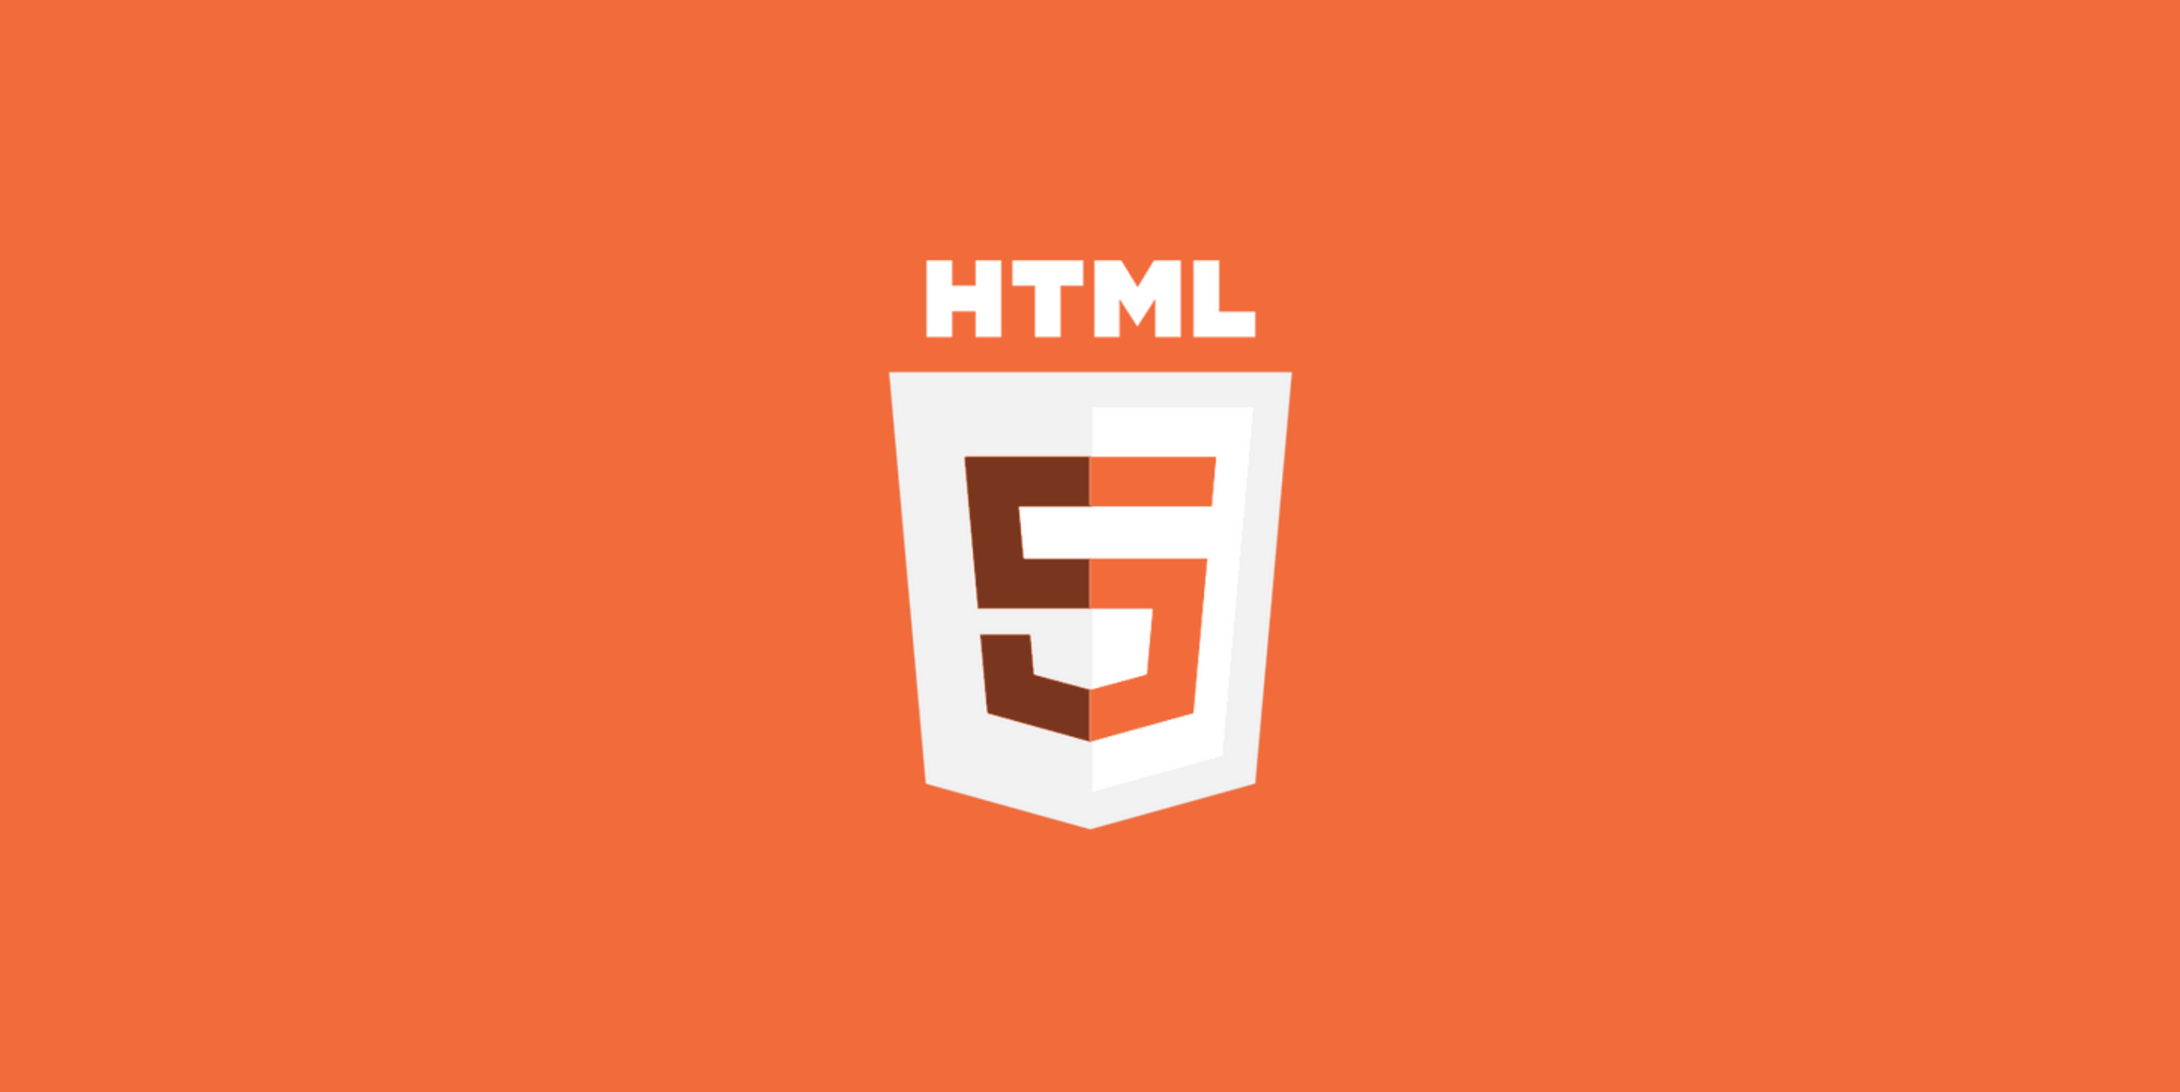 An image displaying the HTML text and logo.